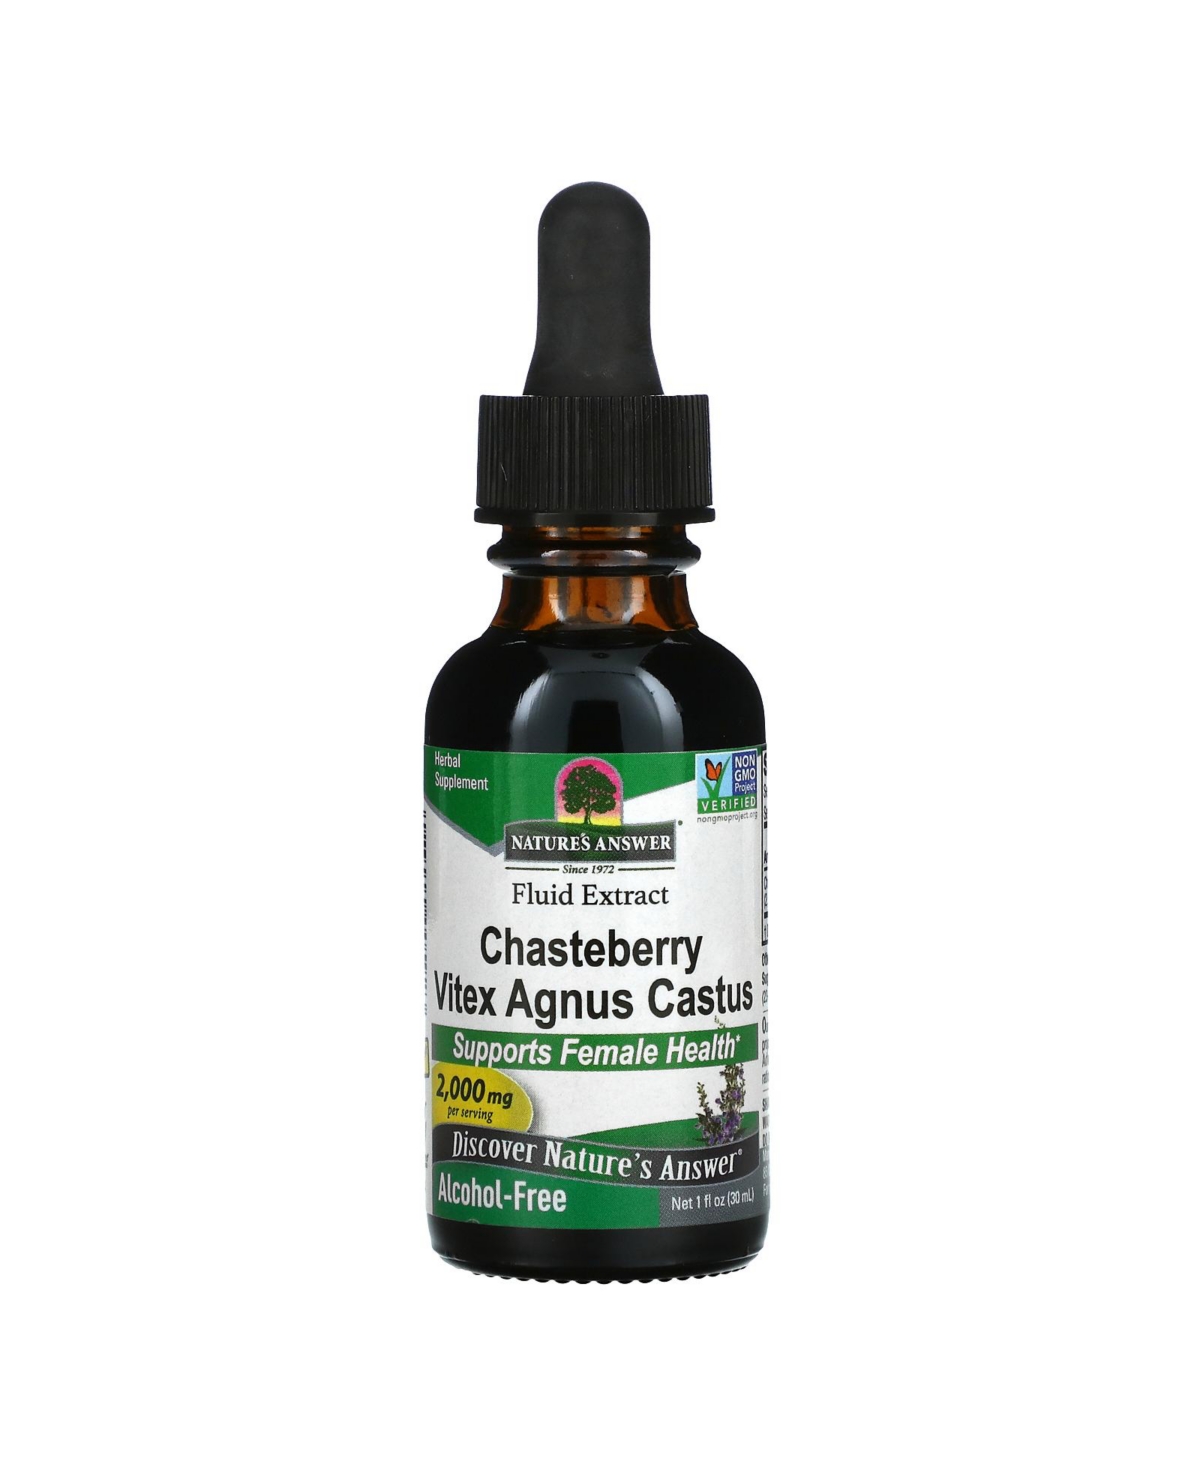 Chasteberry Vitex Agnus Castus Fluid Extract Alcohol-Free 2 000 mg - 1 fl oz (30 ml) - Assorted Pre-pack (See Table